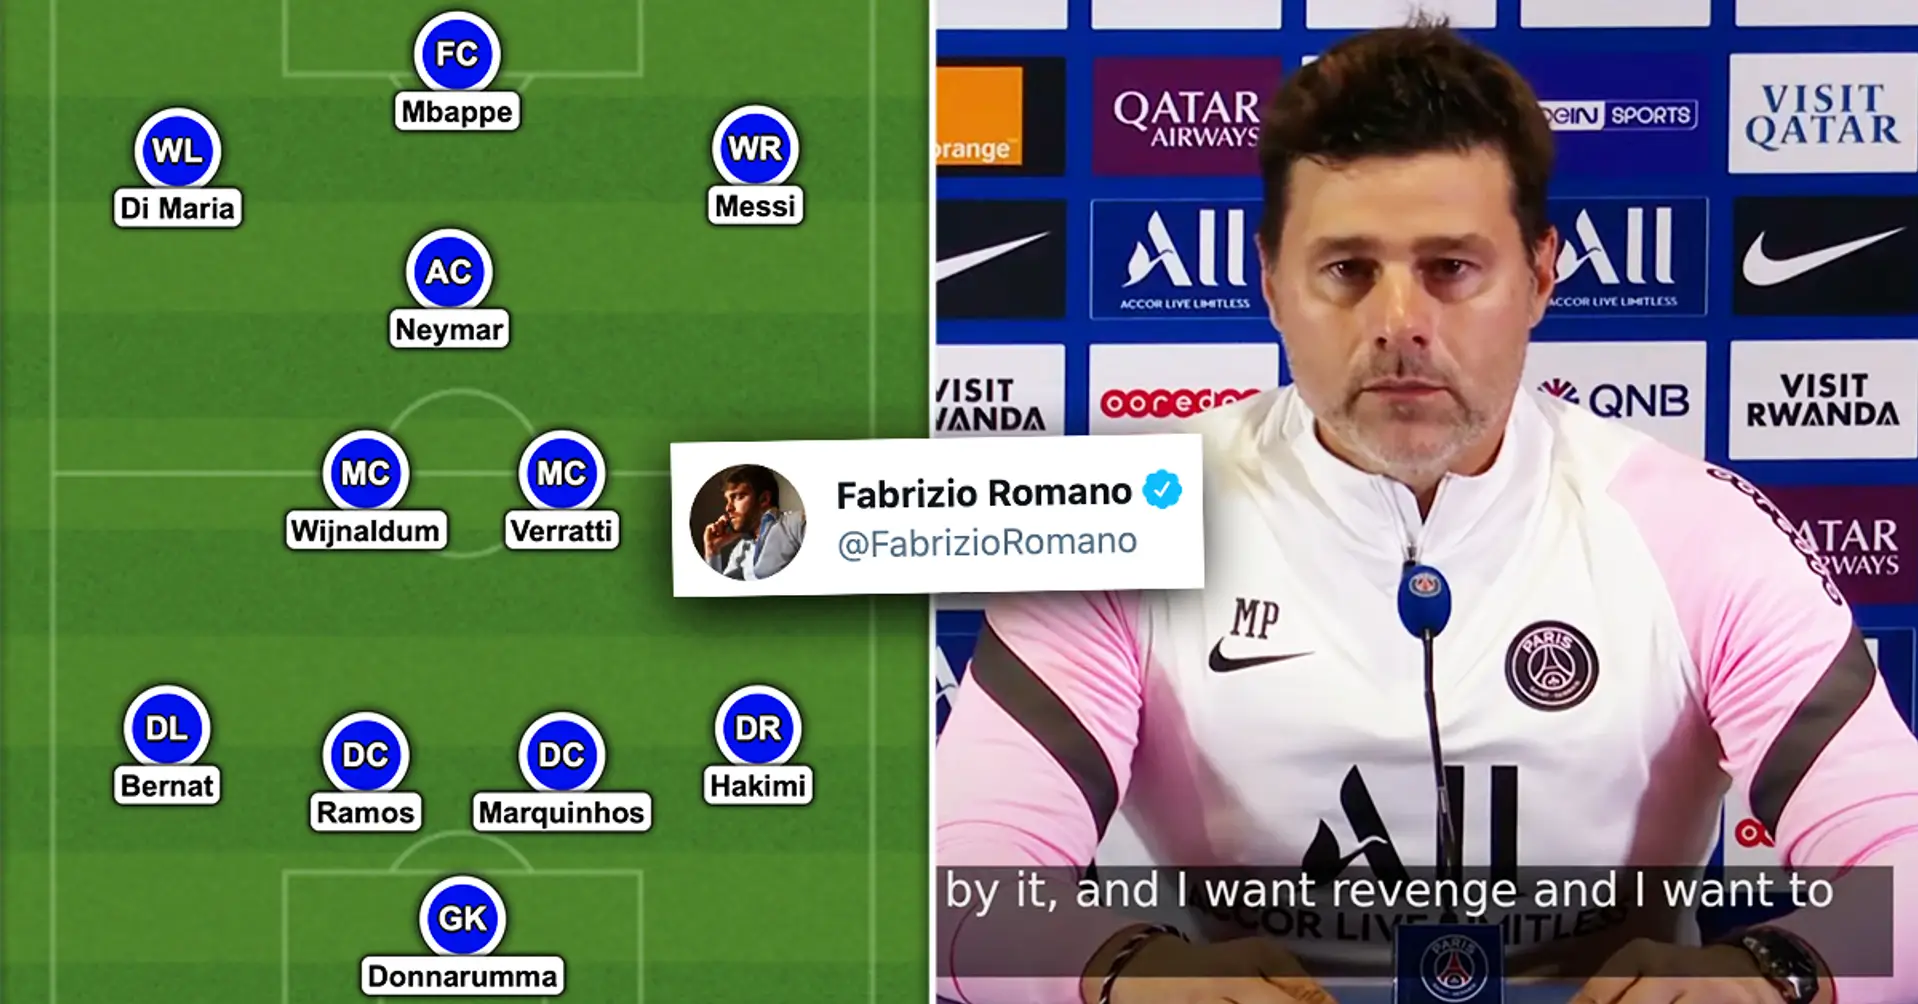 Mauricio Pochettino’s reacts to Lionel Messi’s departure during live interview